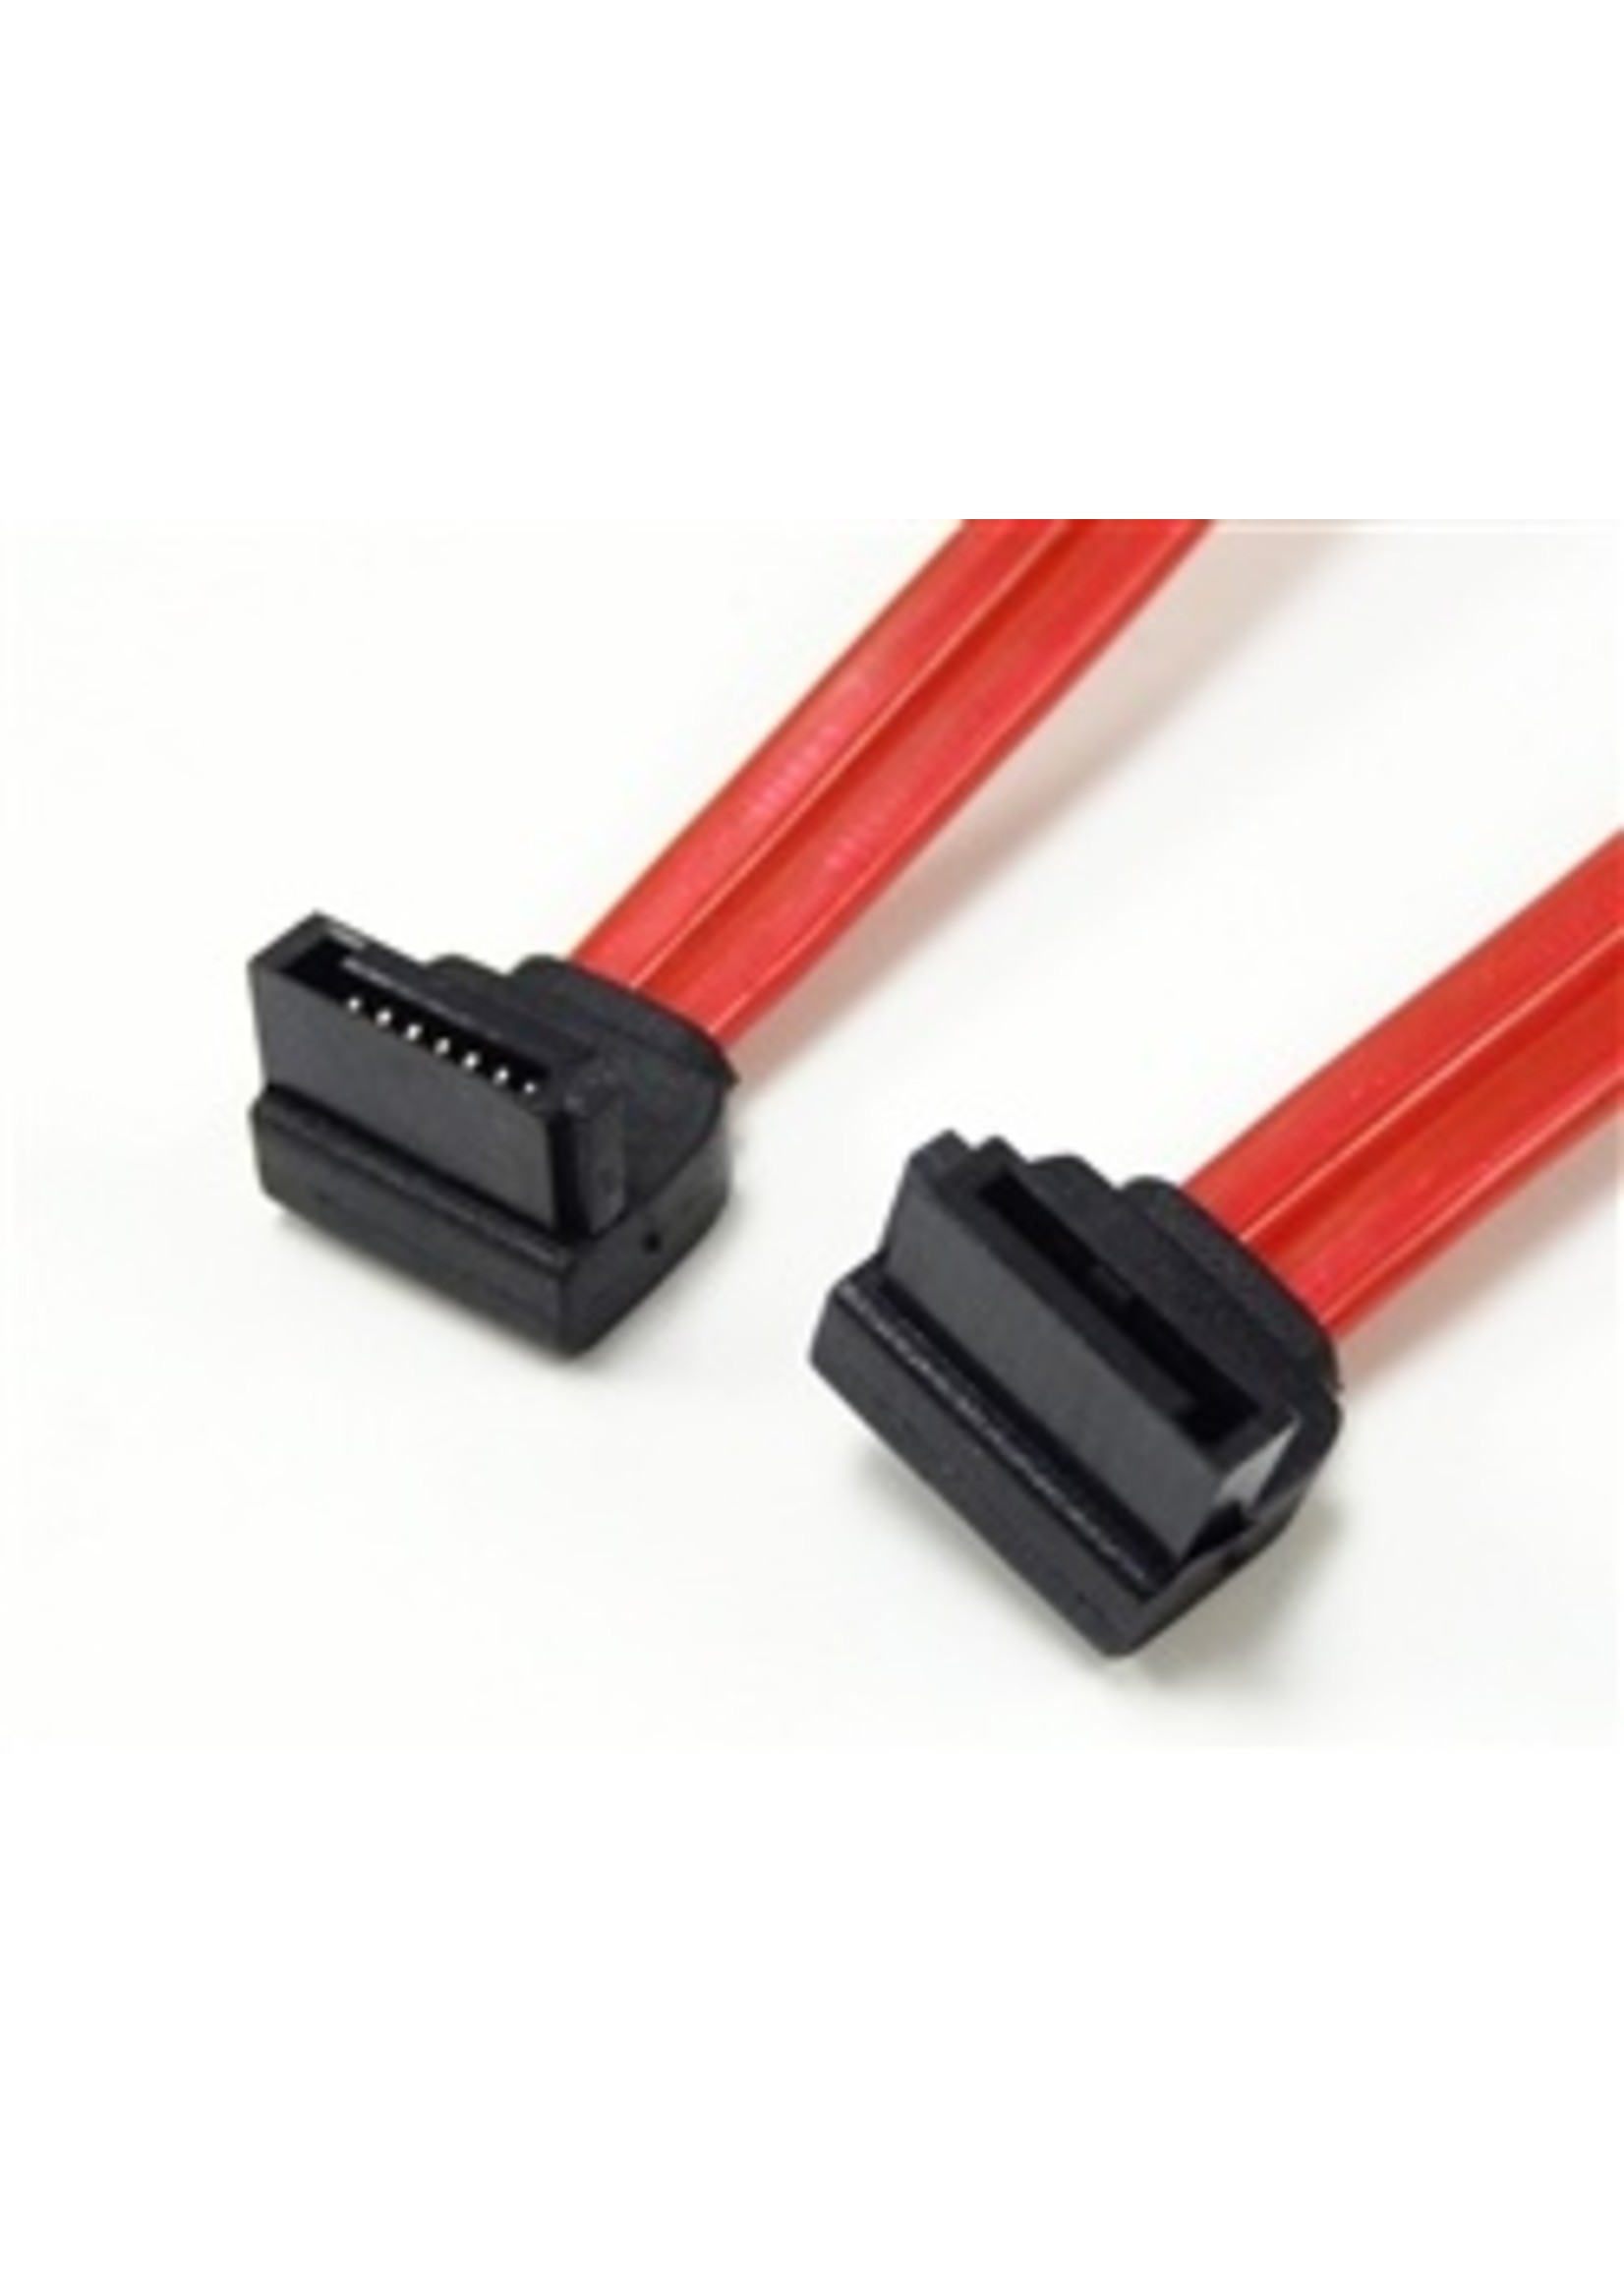 Tera Grand SATA R/A to R/A Cable, 1 meter